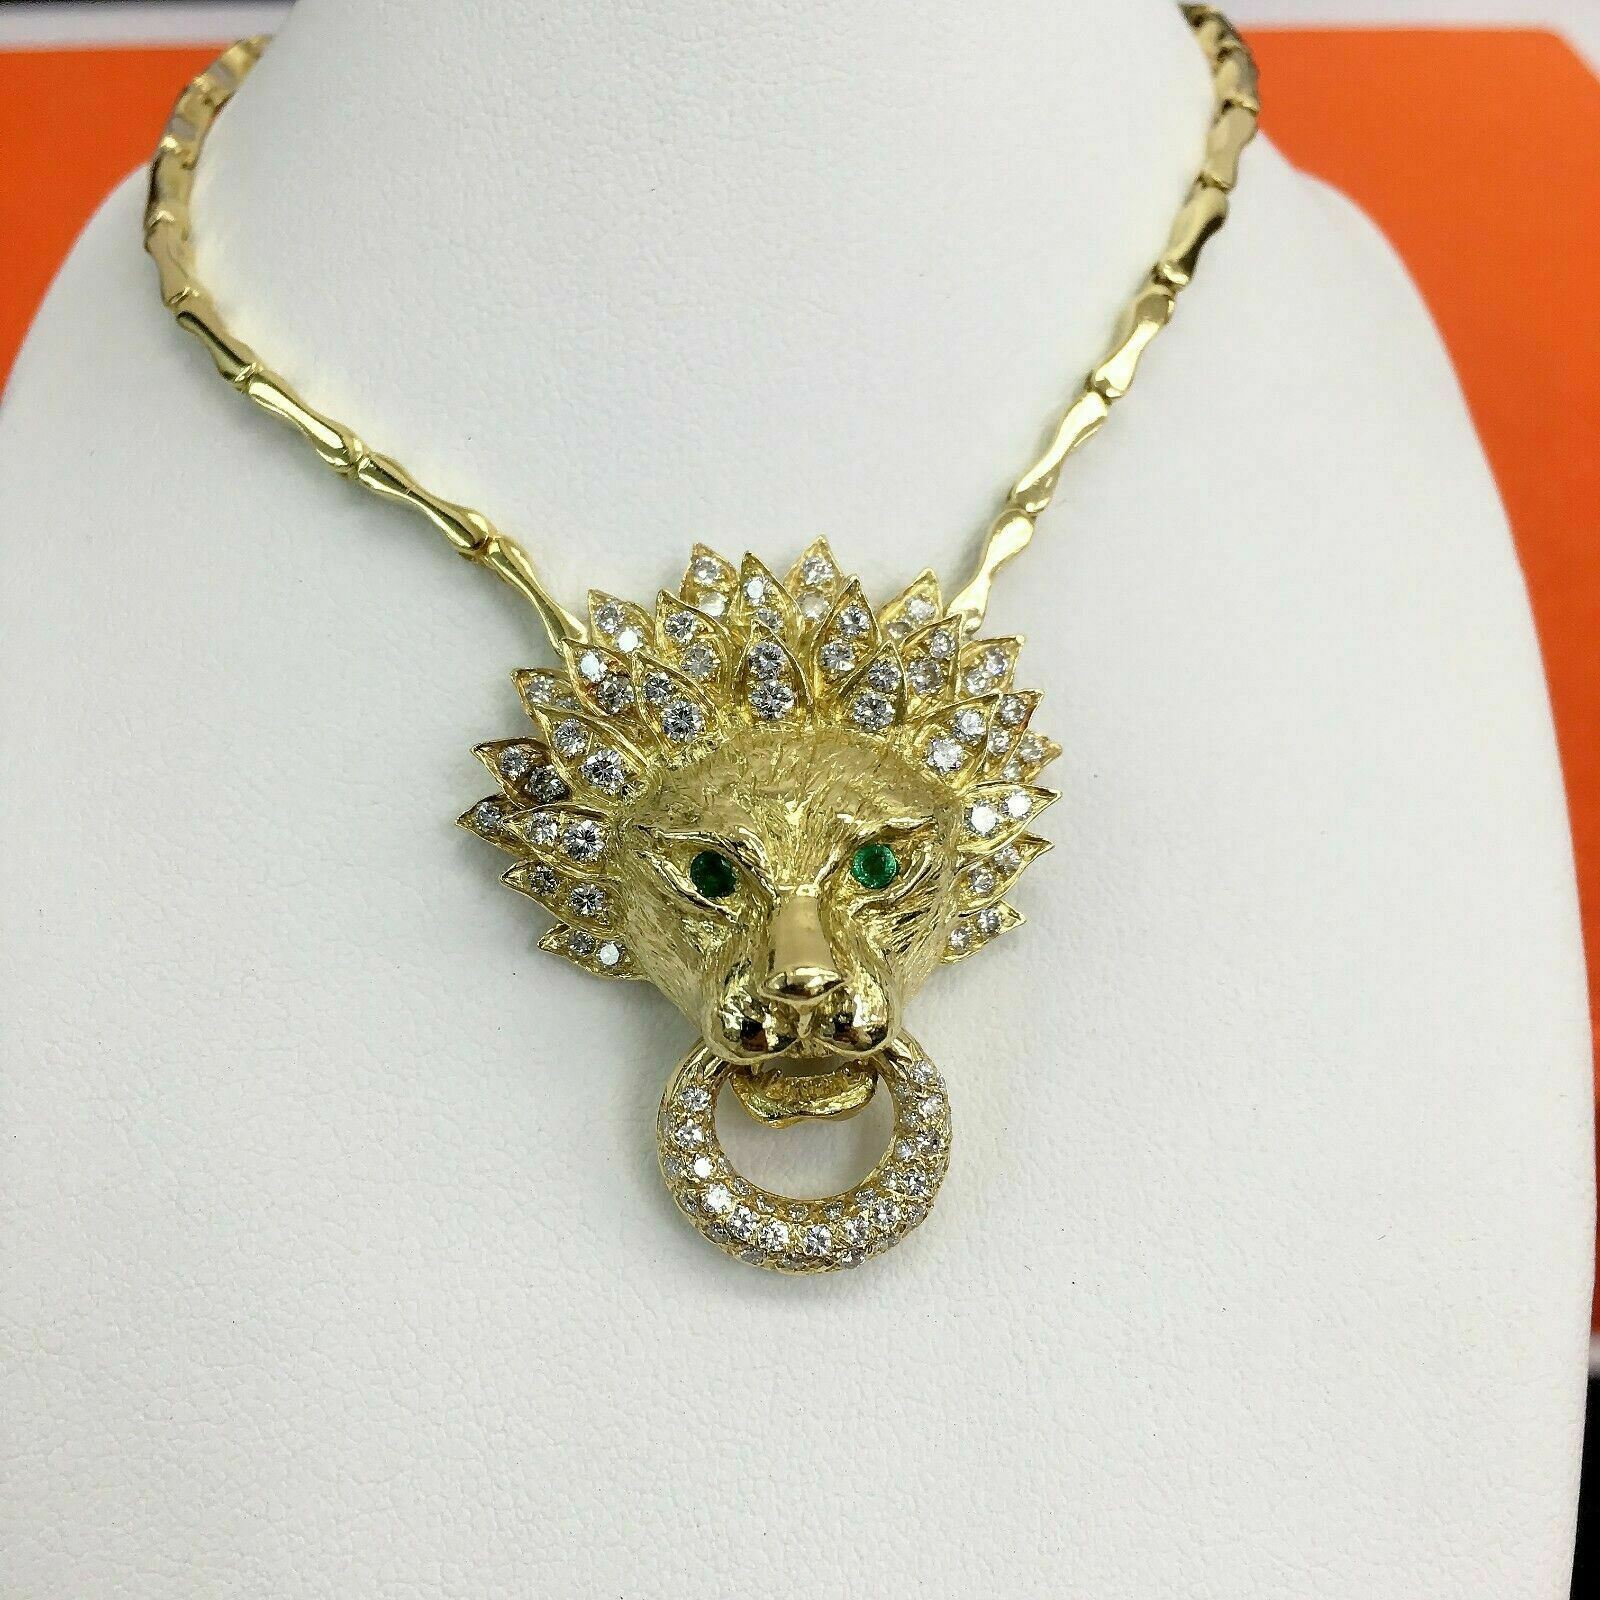 3.55 Carats t.w. Diamond and Emerald Lion's Mane w Necklace Solid 18K Gold